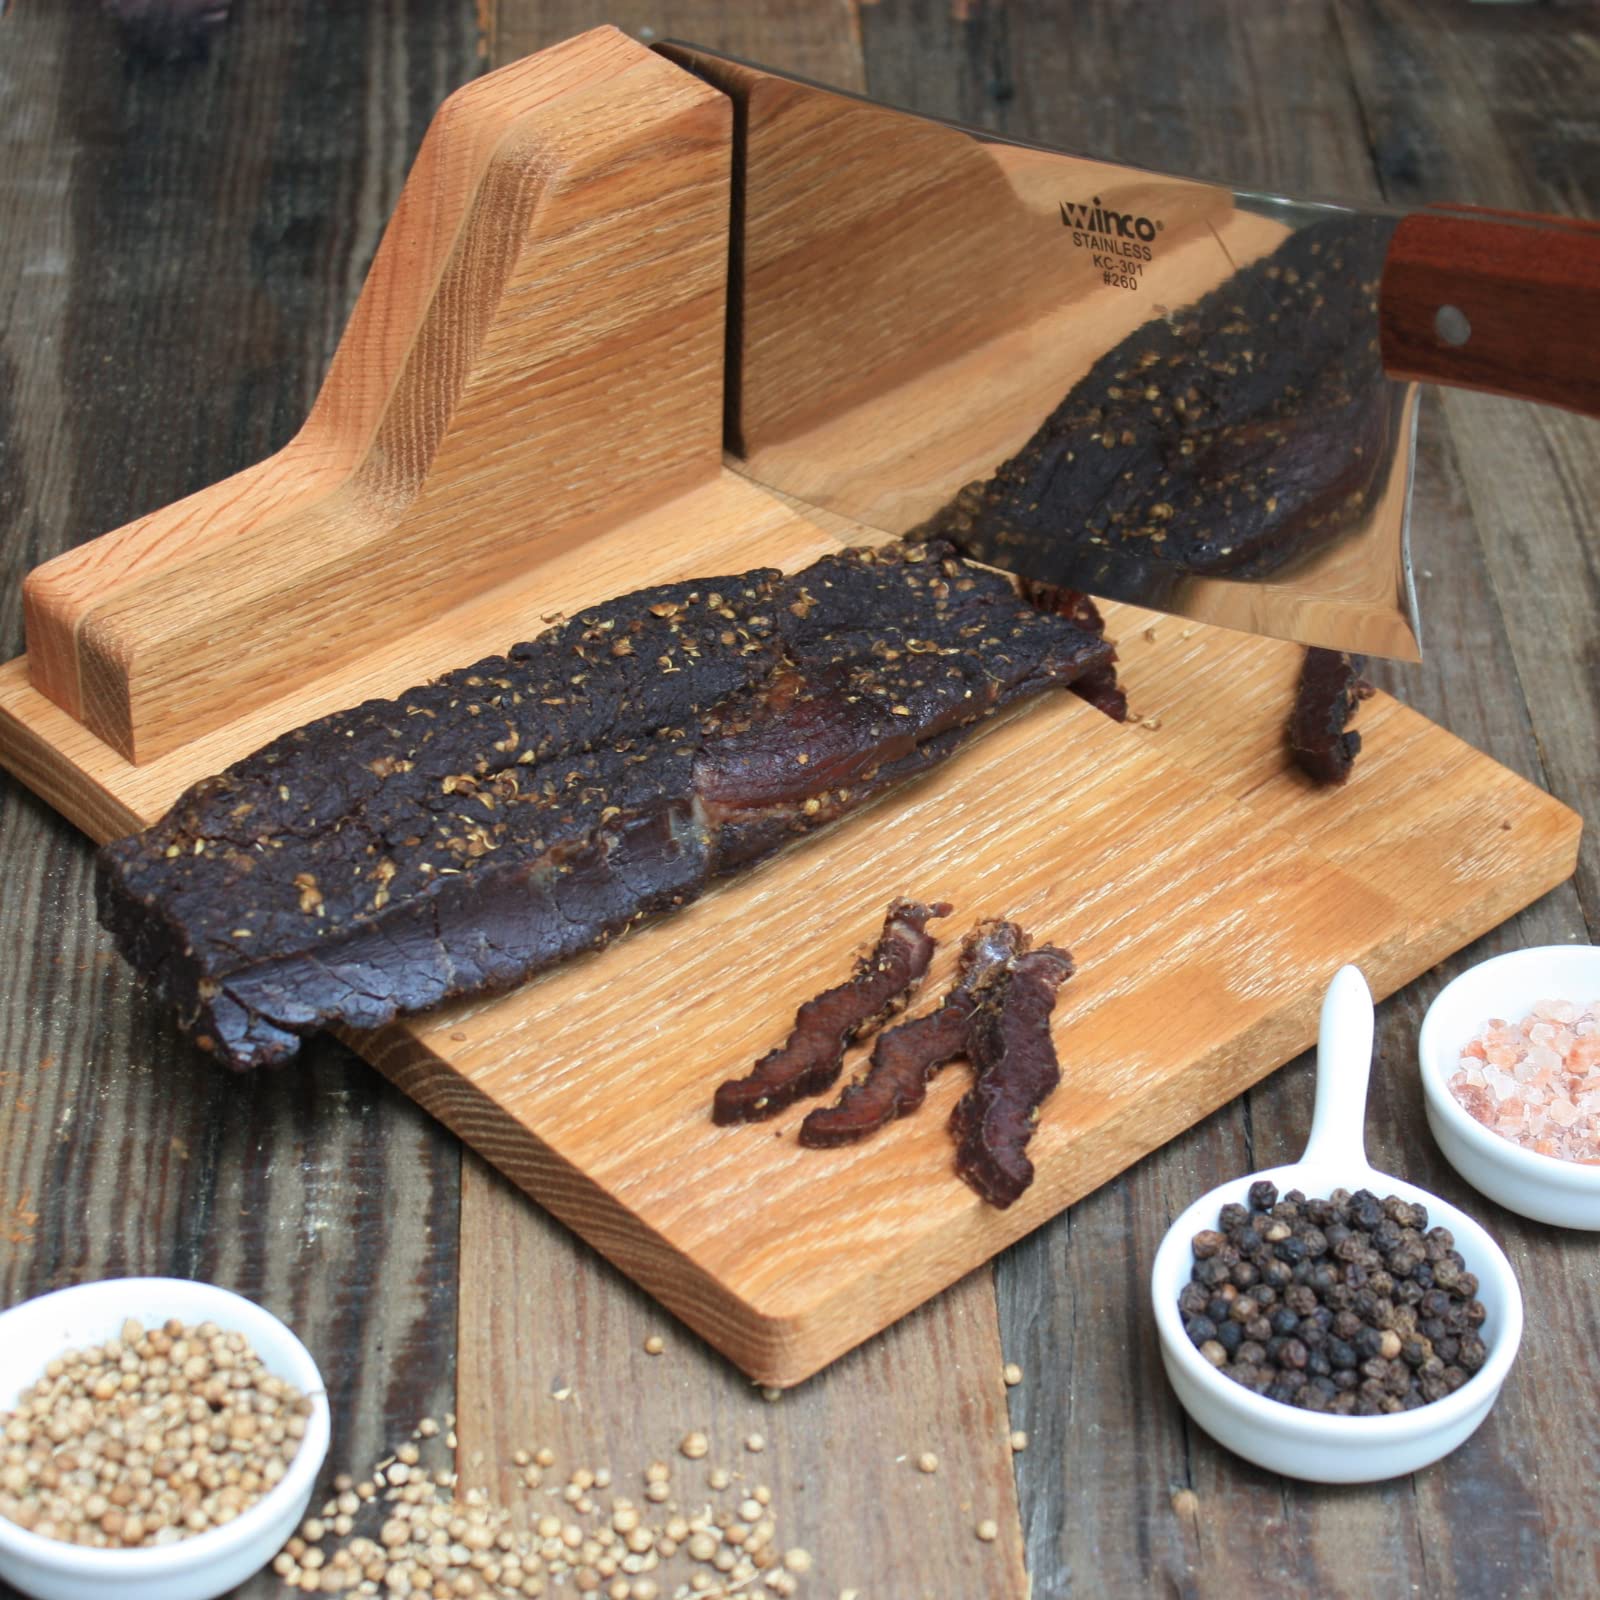 Billy Buckskin Original Biltong Cutter | Easily Slices Through Biltong & Jerky | Biltong Slicer for Beef Biltong Slabs | Cut Thin Slices | Made in the USA | Quality Oak Wood with Removable Blade